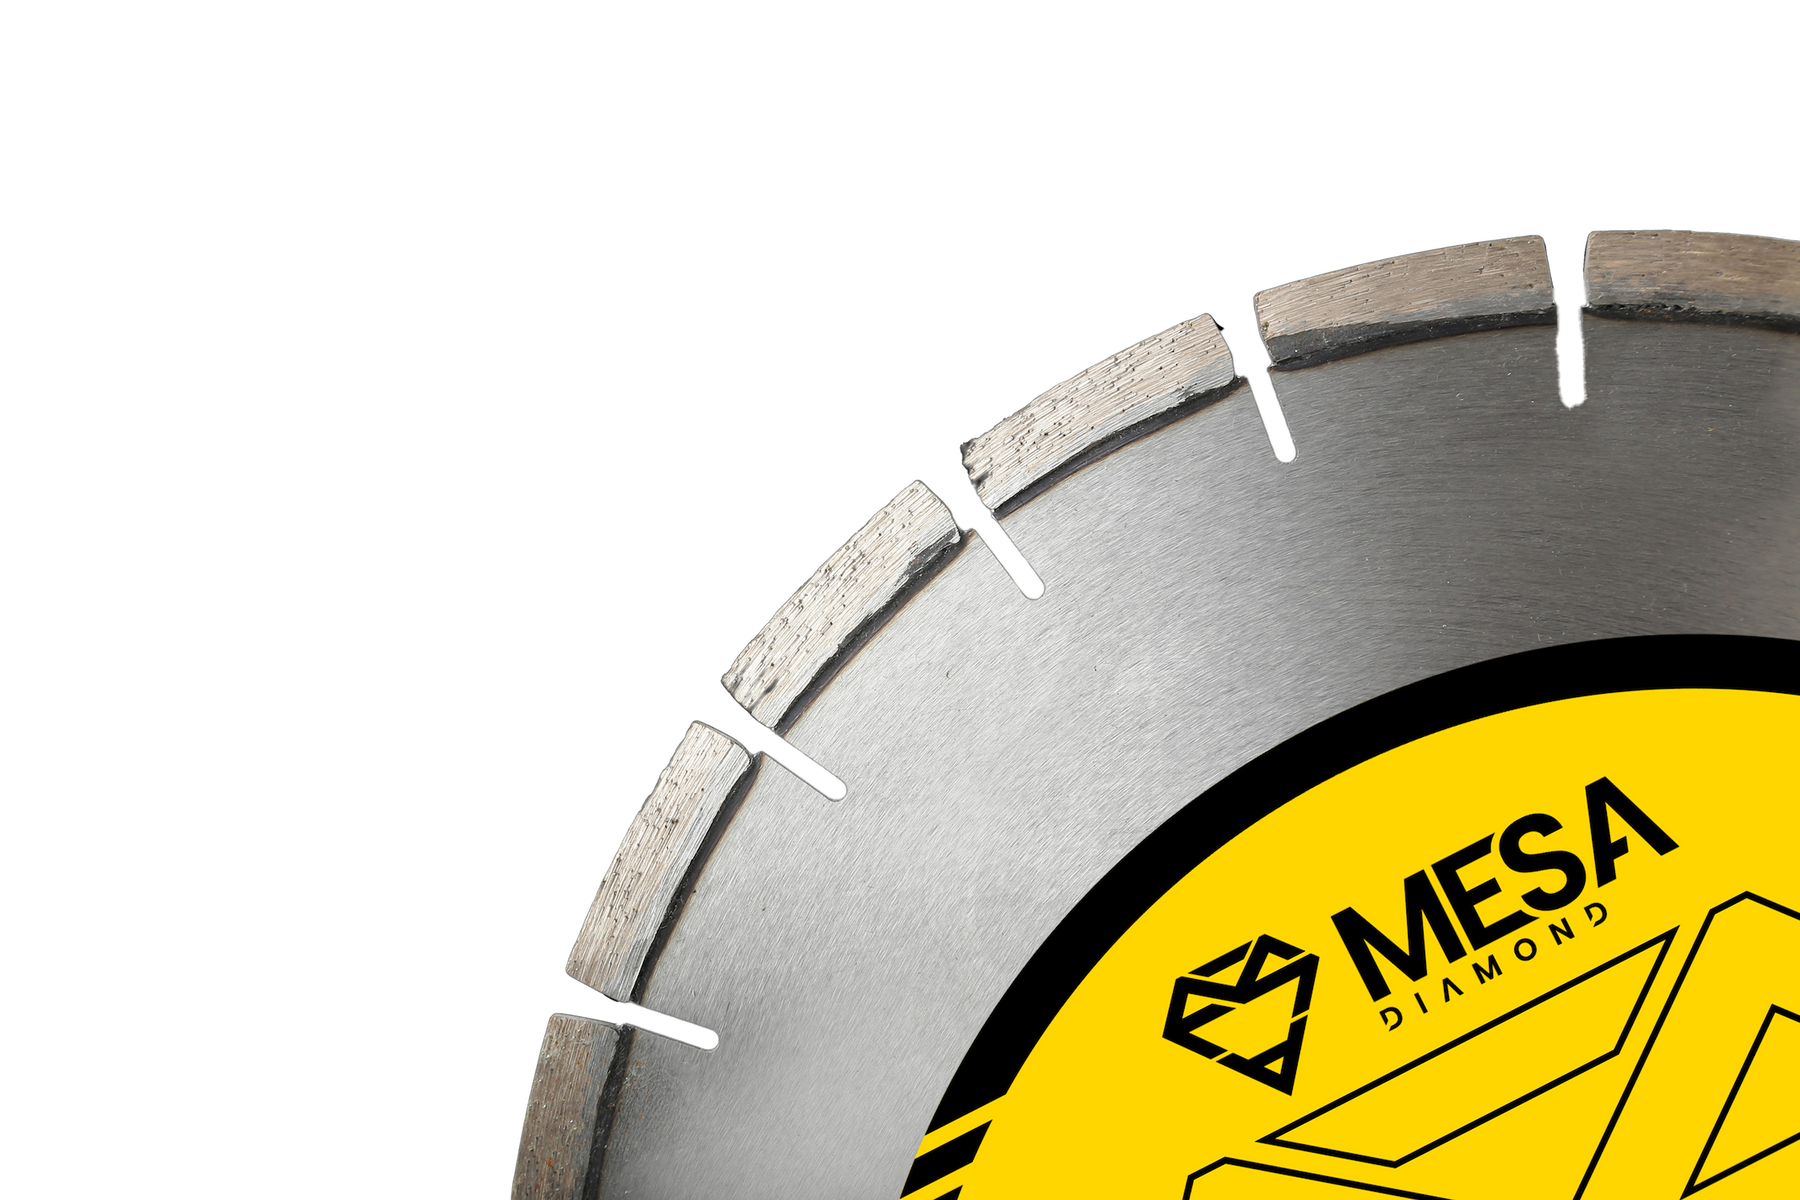 Diamond saw blades allows faster diamond concrete cutting and asphalt cutting experience. Our concrete saw blades have a long-lasting cutting life  With our diamond saw blades, you get solution to how to cut concrete pavers question.